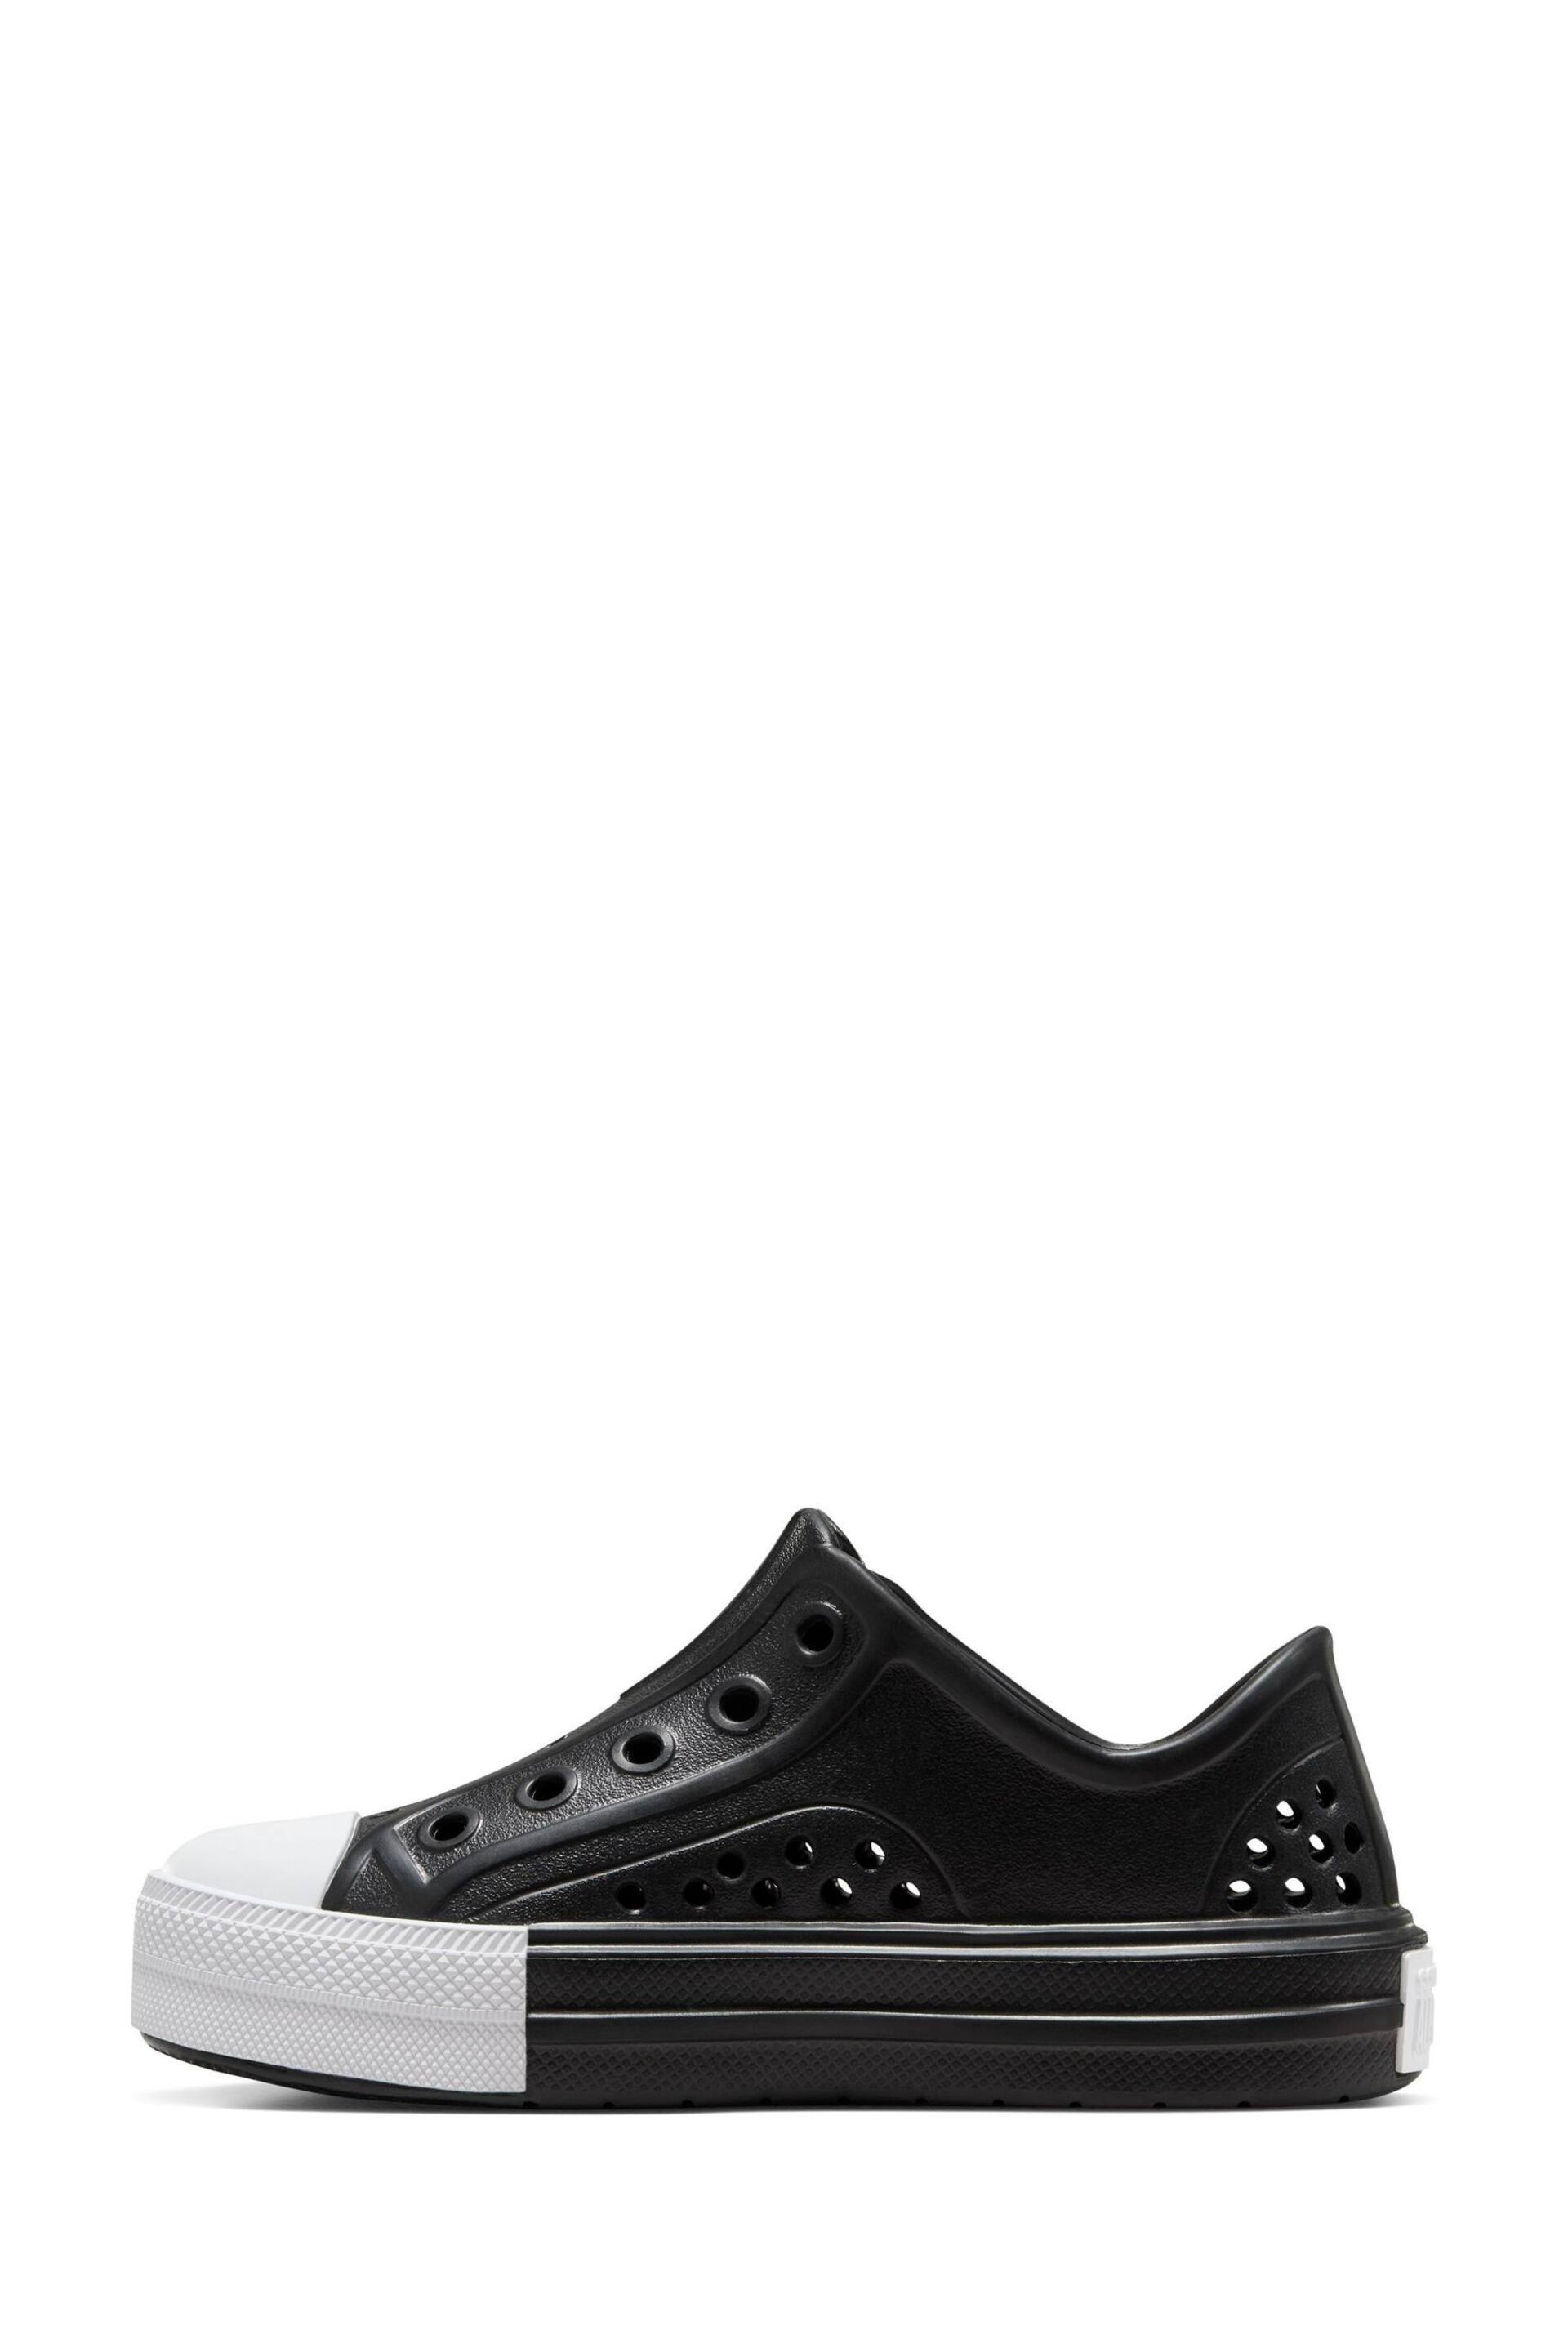 Converse Black Chuck Taylor All Star Play Lite Cx Sandals - Image 2 of 9